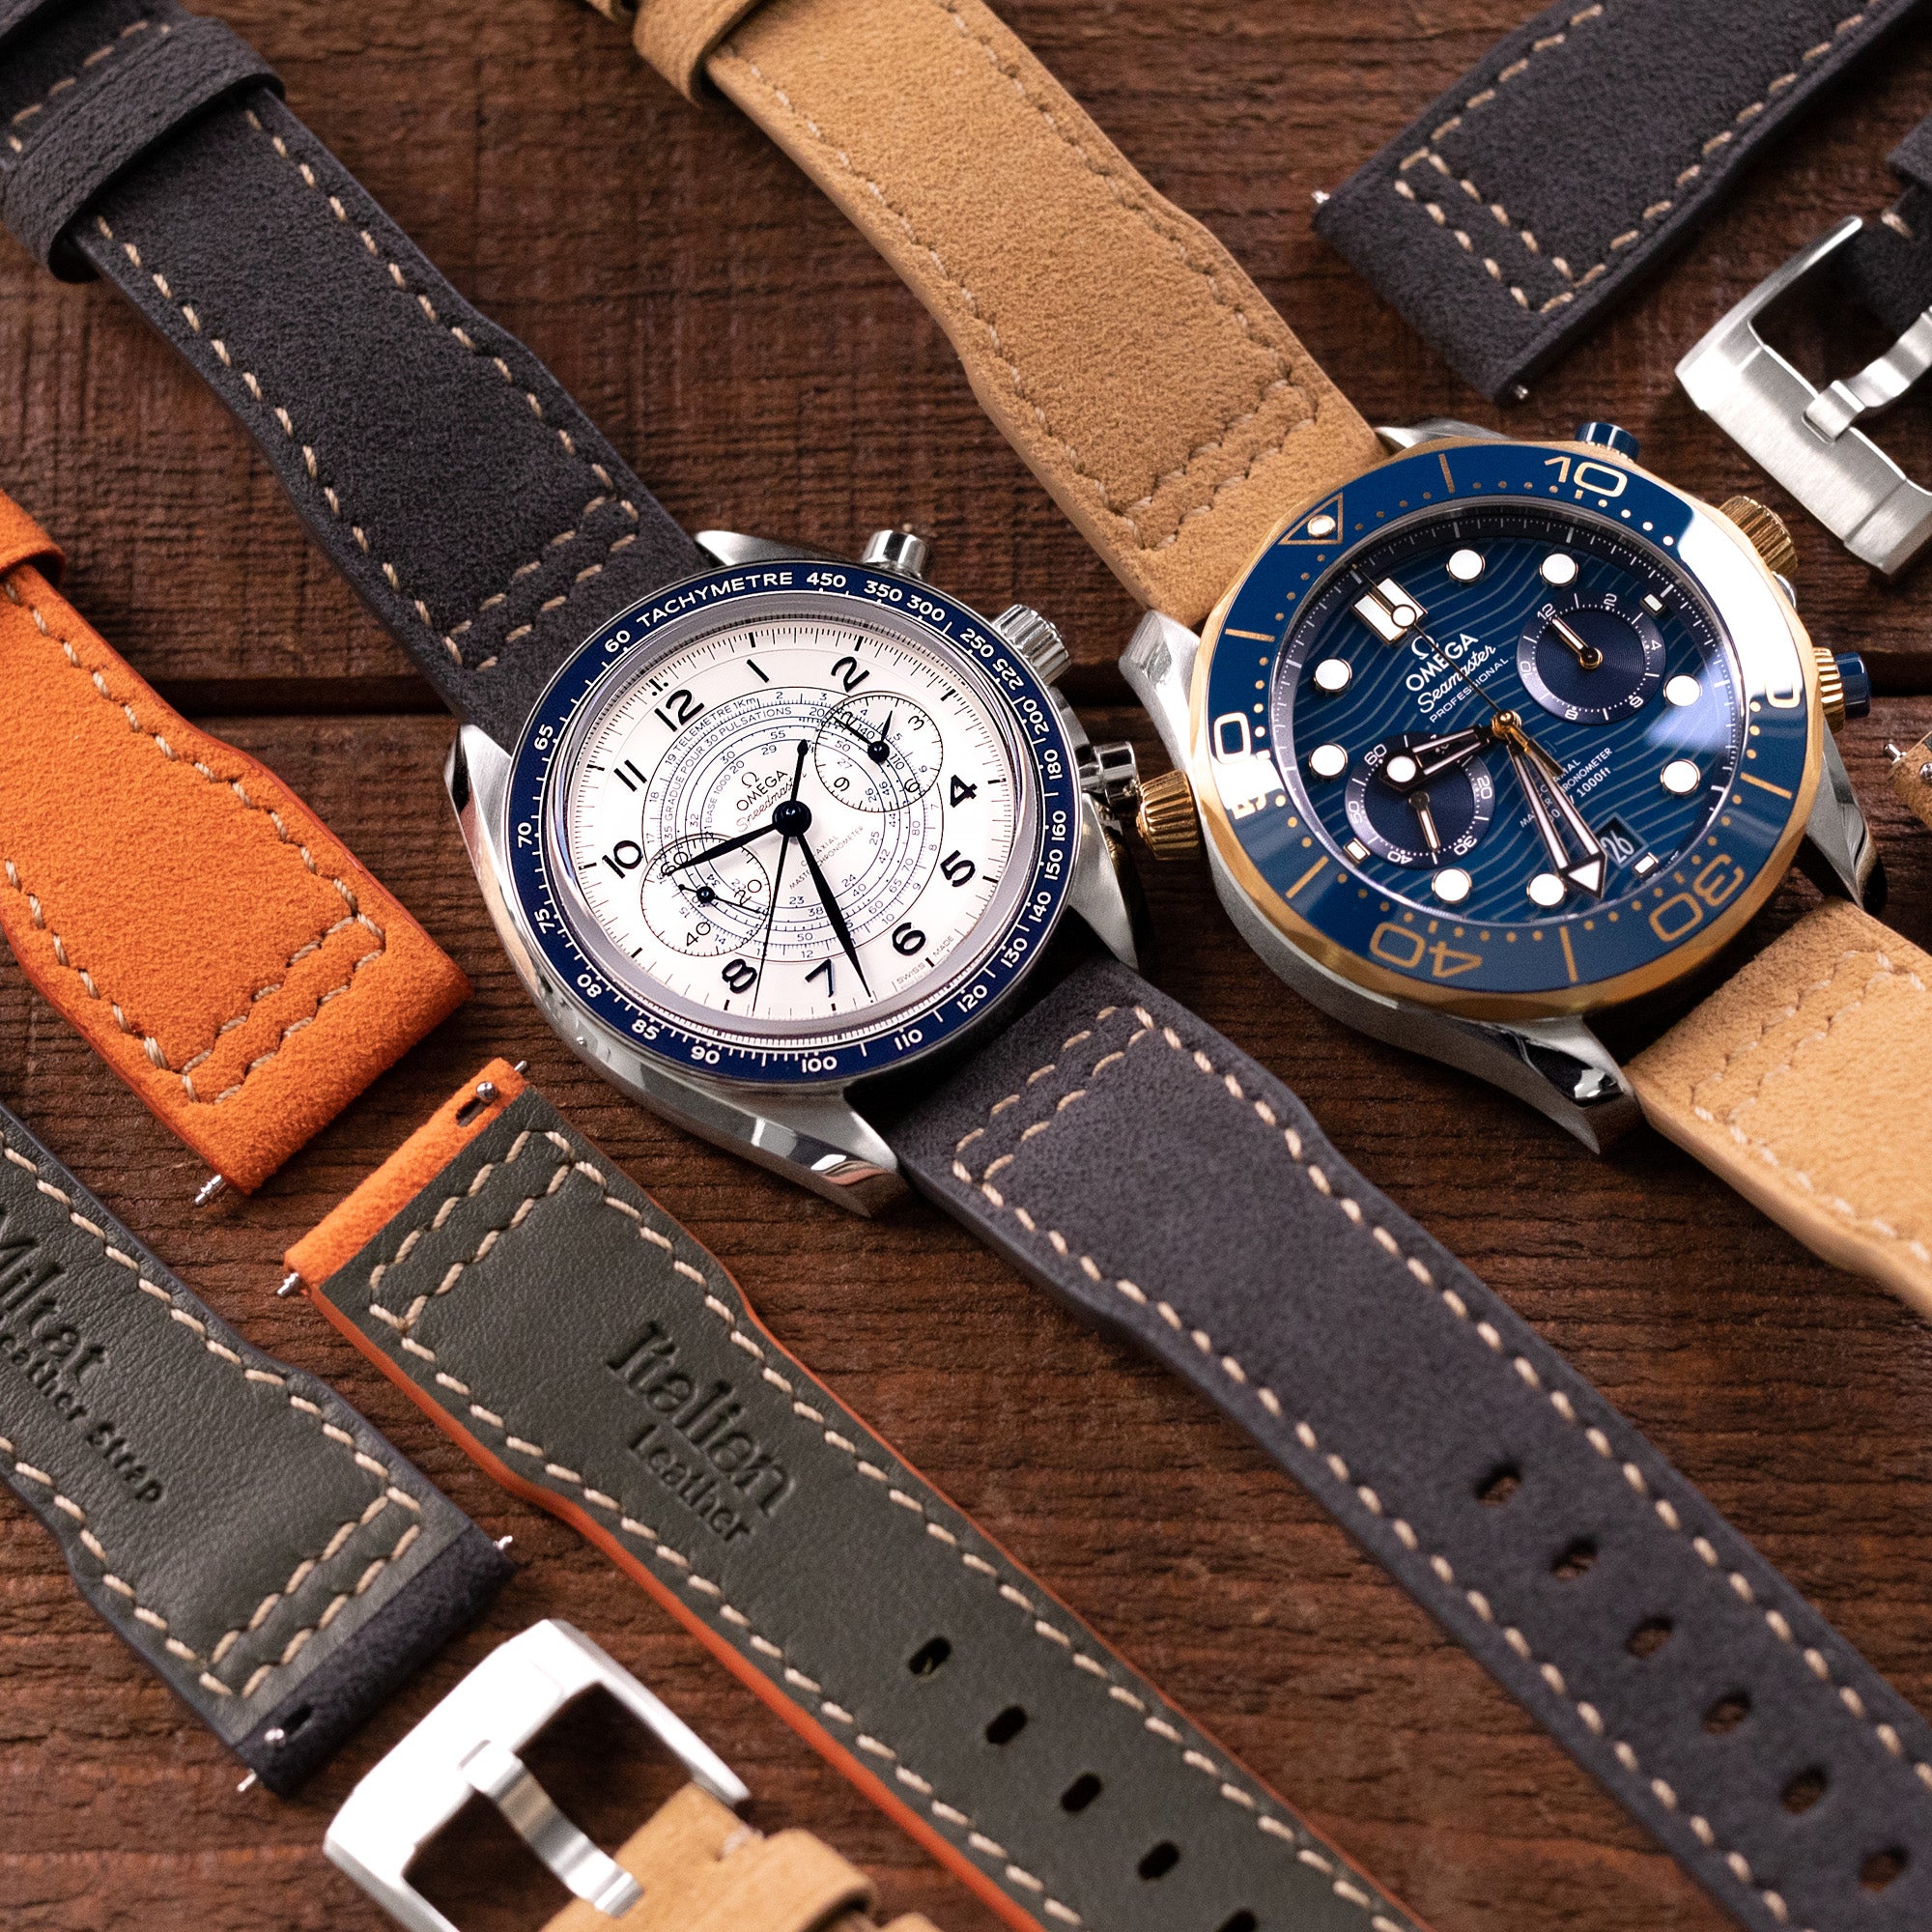 Omega and IWC watches trio of Alcantara Watch Bands by strapcode